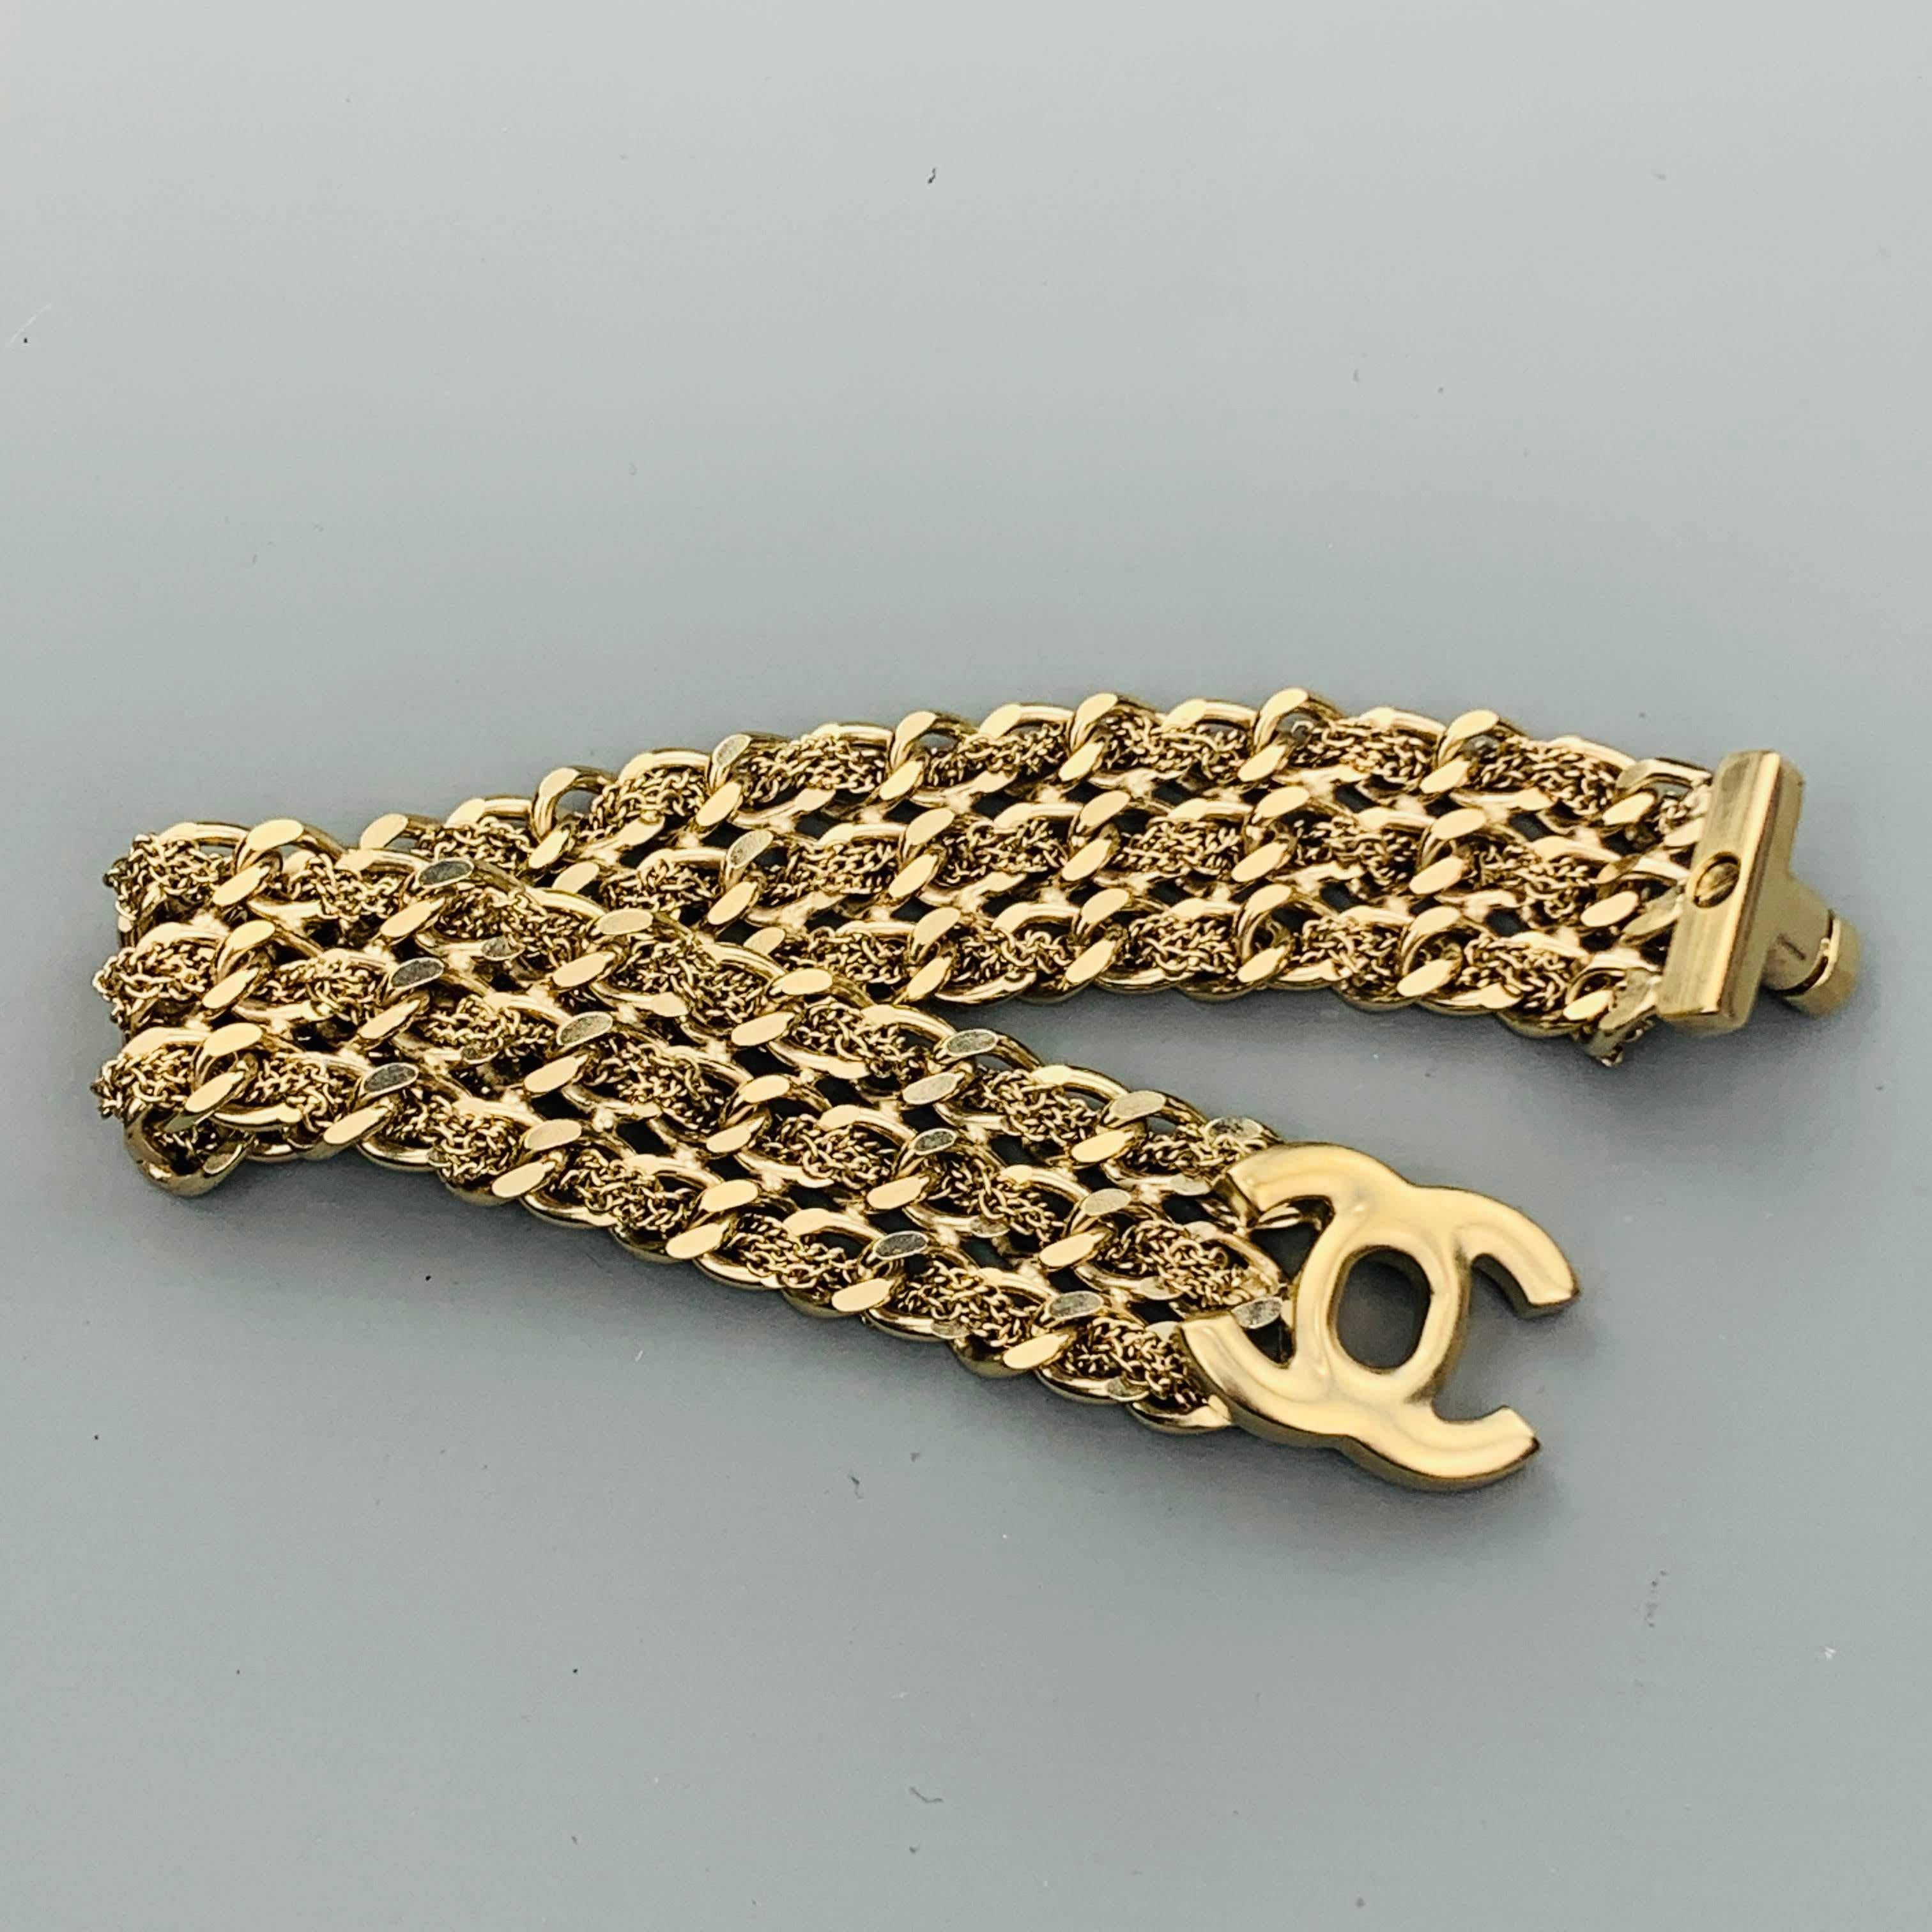 CHANEL bracelet comes in silver tone metal and features a chain link strap with micro chain woven through and CC logo turn lock closure. Made in Italy.
 
Excellent Pre-Owned Condition.
Marked: 2012 P
 
Length: 7 in.
Width: 0.65 in.